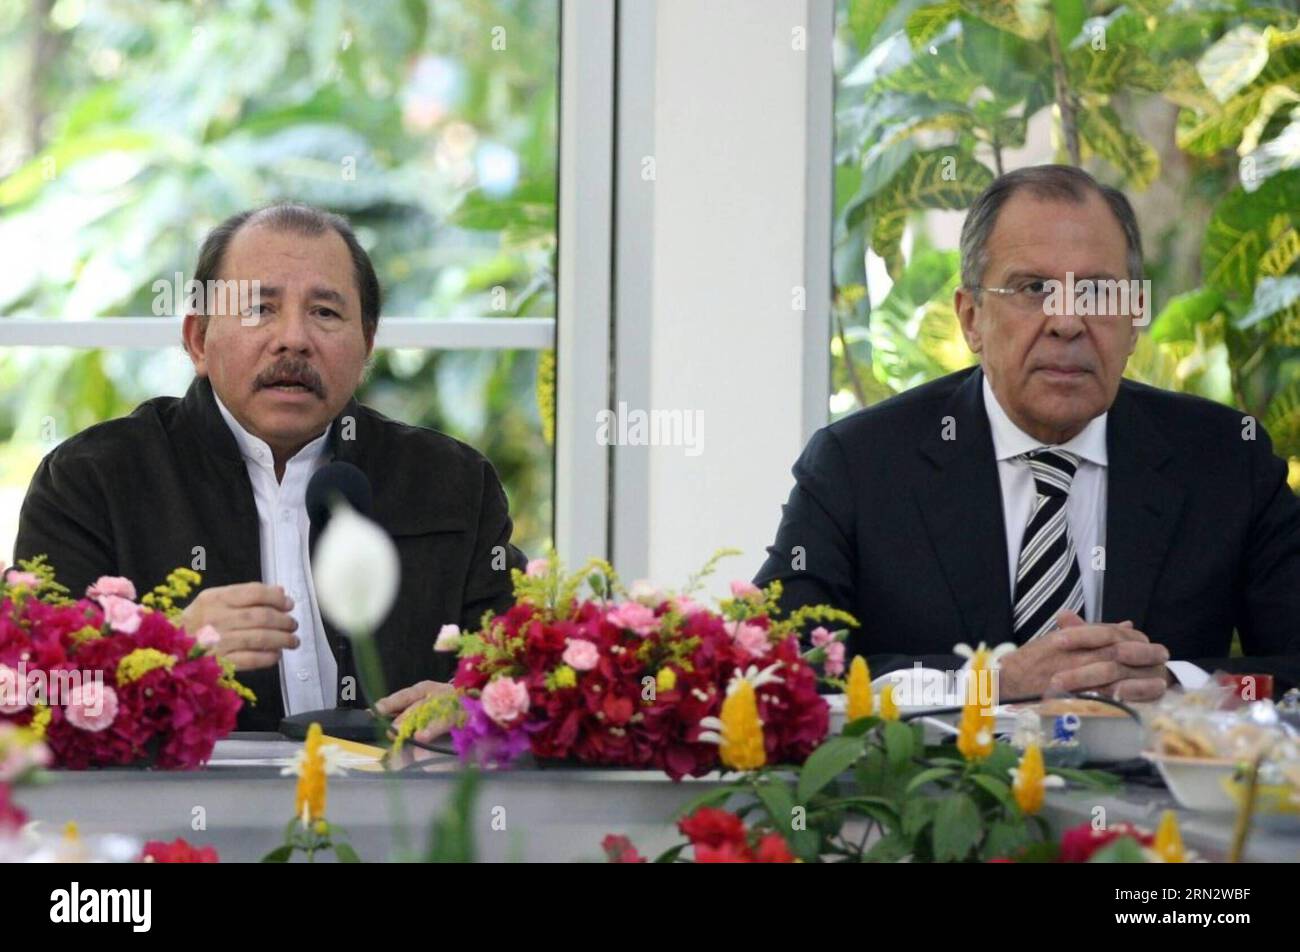 MANAGUA, March 25, 2015 -- Image provided by shows Nicaraguan President, Daniel Ortega (L), meeting with Russian Minister of Foreign Affairs, Sergei Lavrov, in the city of Managua, Nicaragua, on March 25, 2015. ) NICARAGUA-MANAGUA-RUSSIA-VISIT NICARAGUA SxPRESIDENCY PUBLICATIONxNOTxINxCHN   Managua March 25 2015 Image provided by Shows Nicaraguans President Daniel Ortega l Meeting With Russian Ministers of Foreign Affairs Sergei Lavrov in The City of Managua Nicaragua ON March 25 2015 Nicaragua Managua Russia Visit Nicaragua  PUBLICATIONxNOTxINxCHN Stock Photo